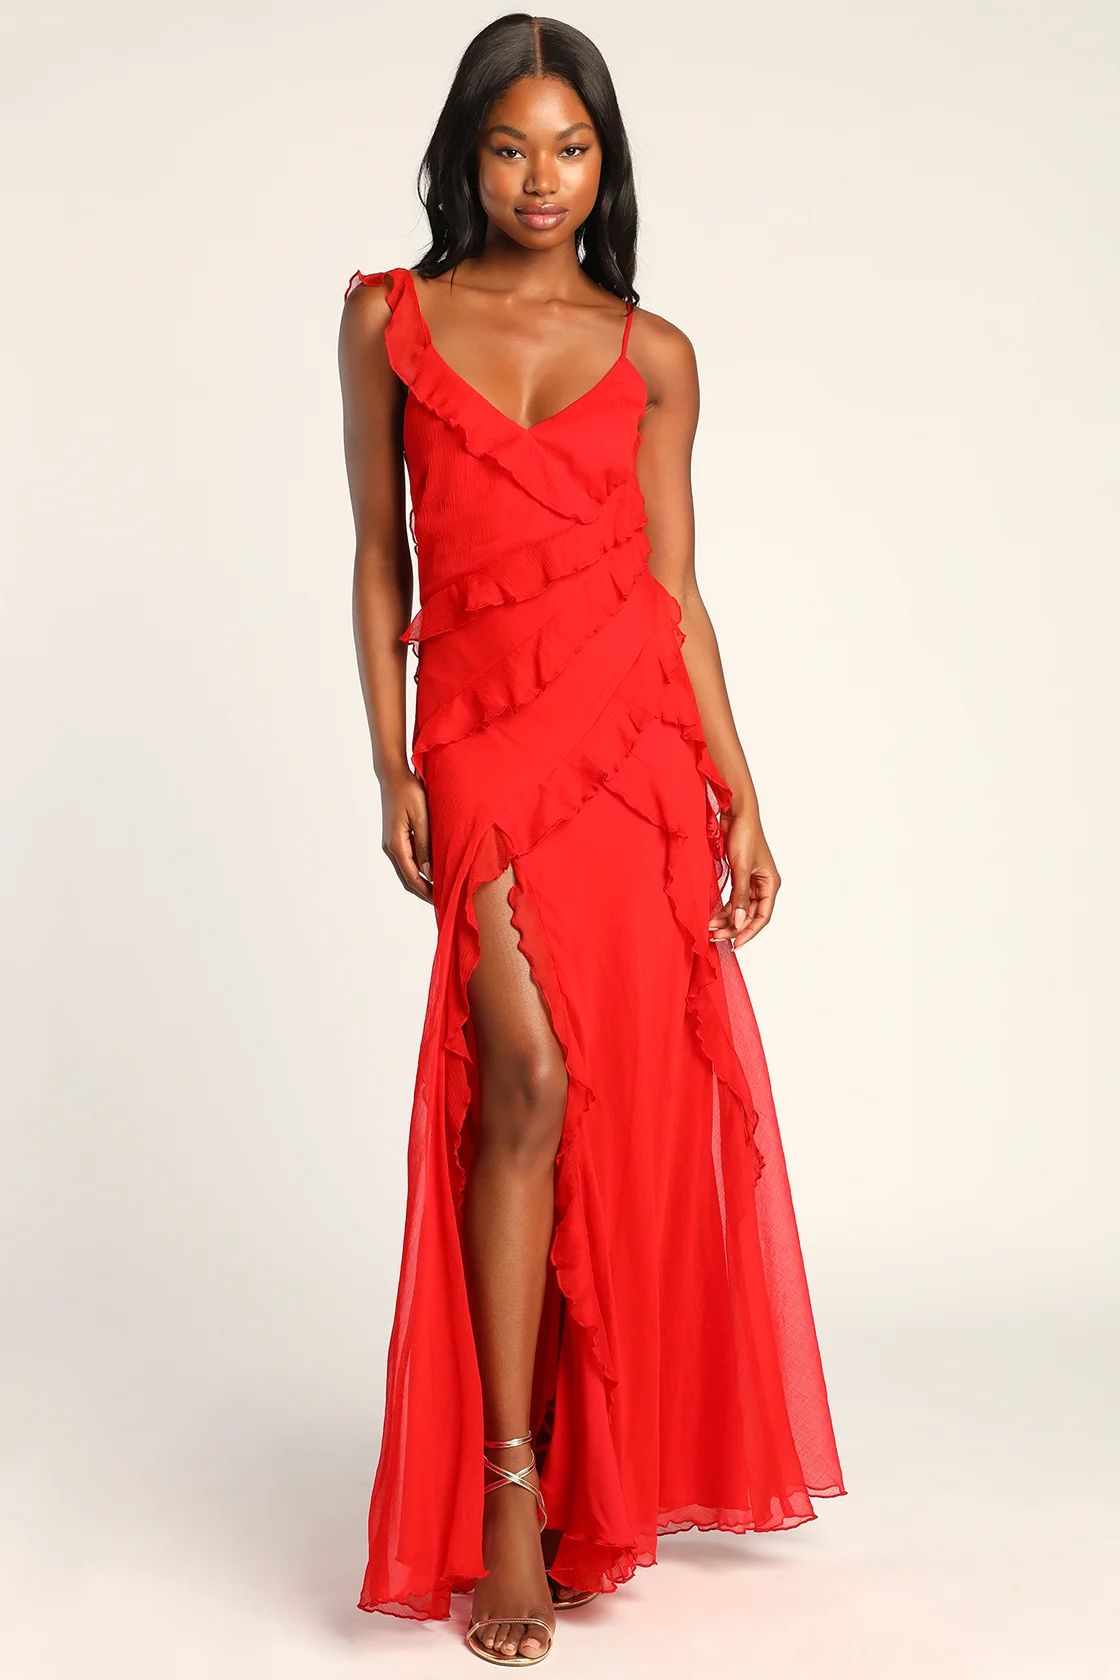 Tier Desire Red Tiered Ruffled Lace-Up Maxi Dress | Lulus (US)